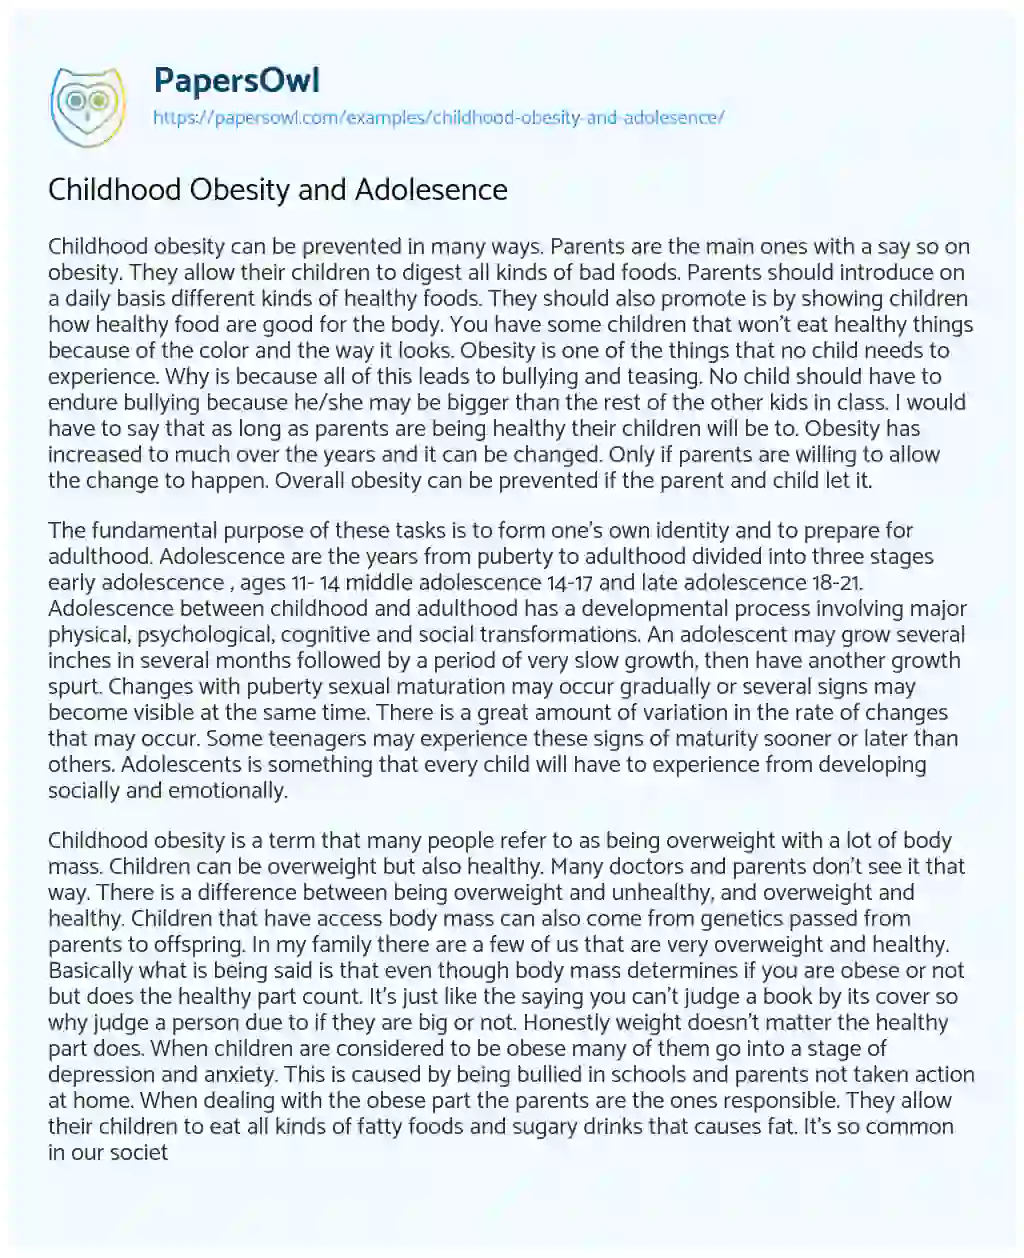 Essay on Childhood Obesity and Adolesence